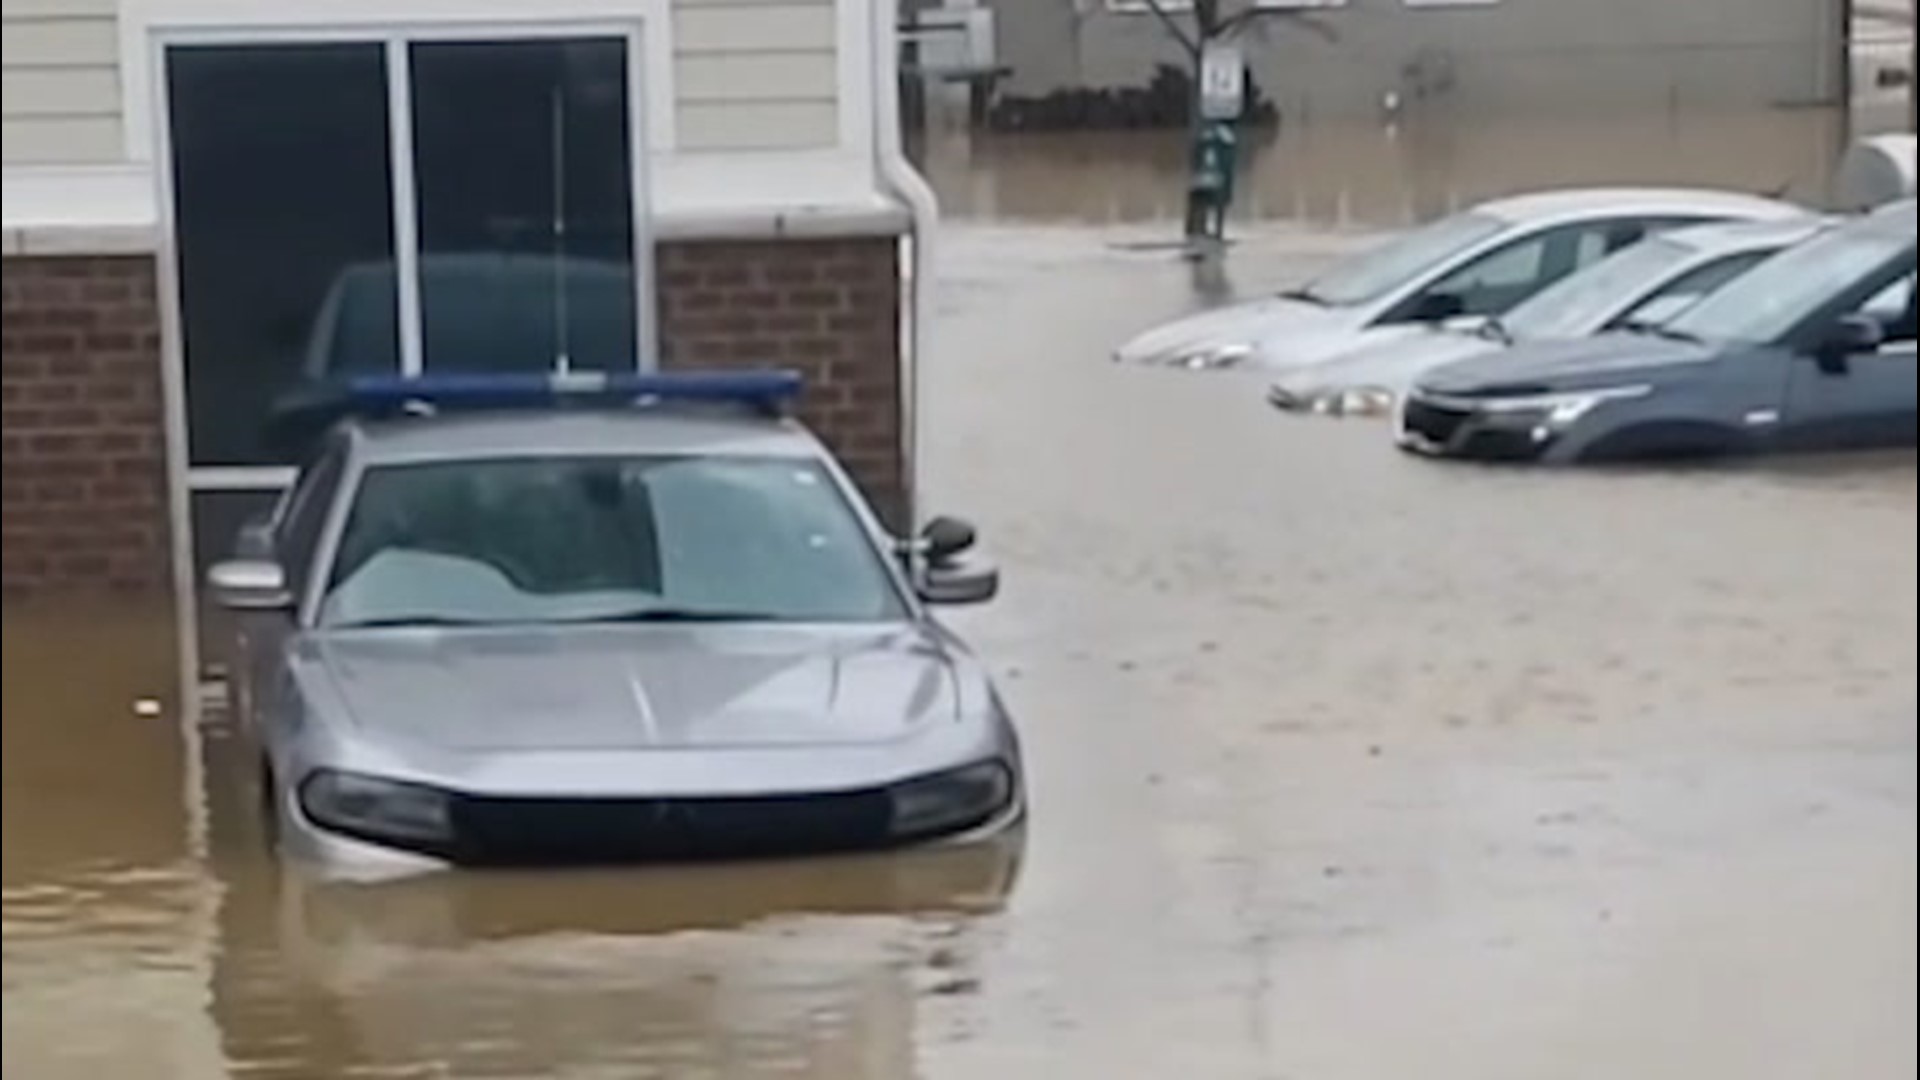 Flash flooding overtook roads, parking lots, homes and businesses throughout southern and central Kentucky on the final weekend of February.